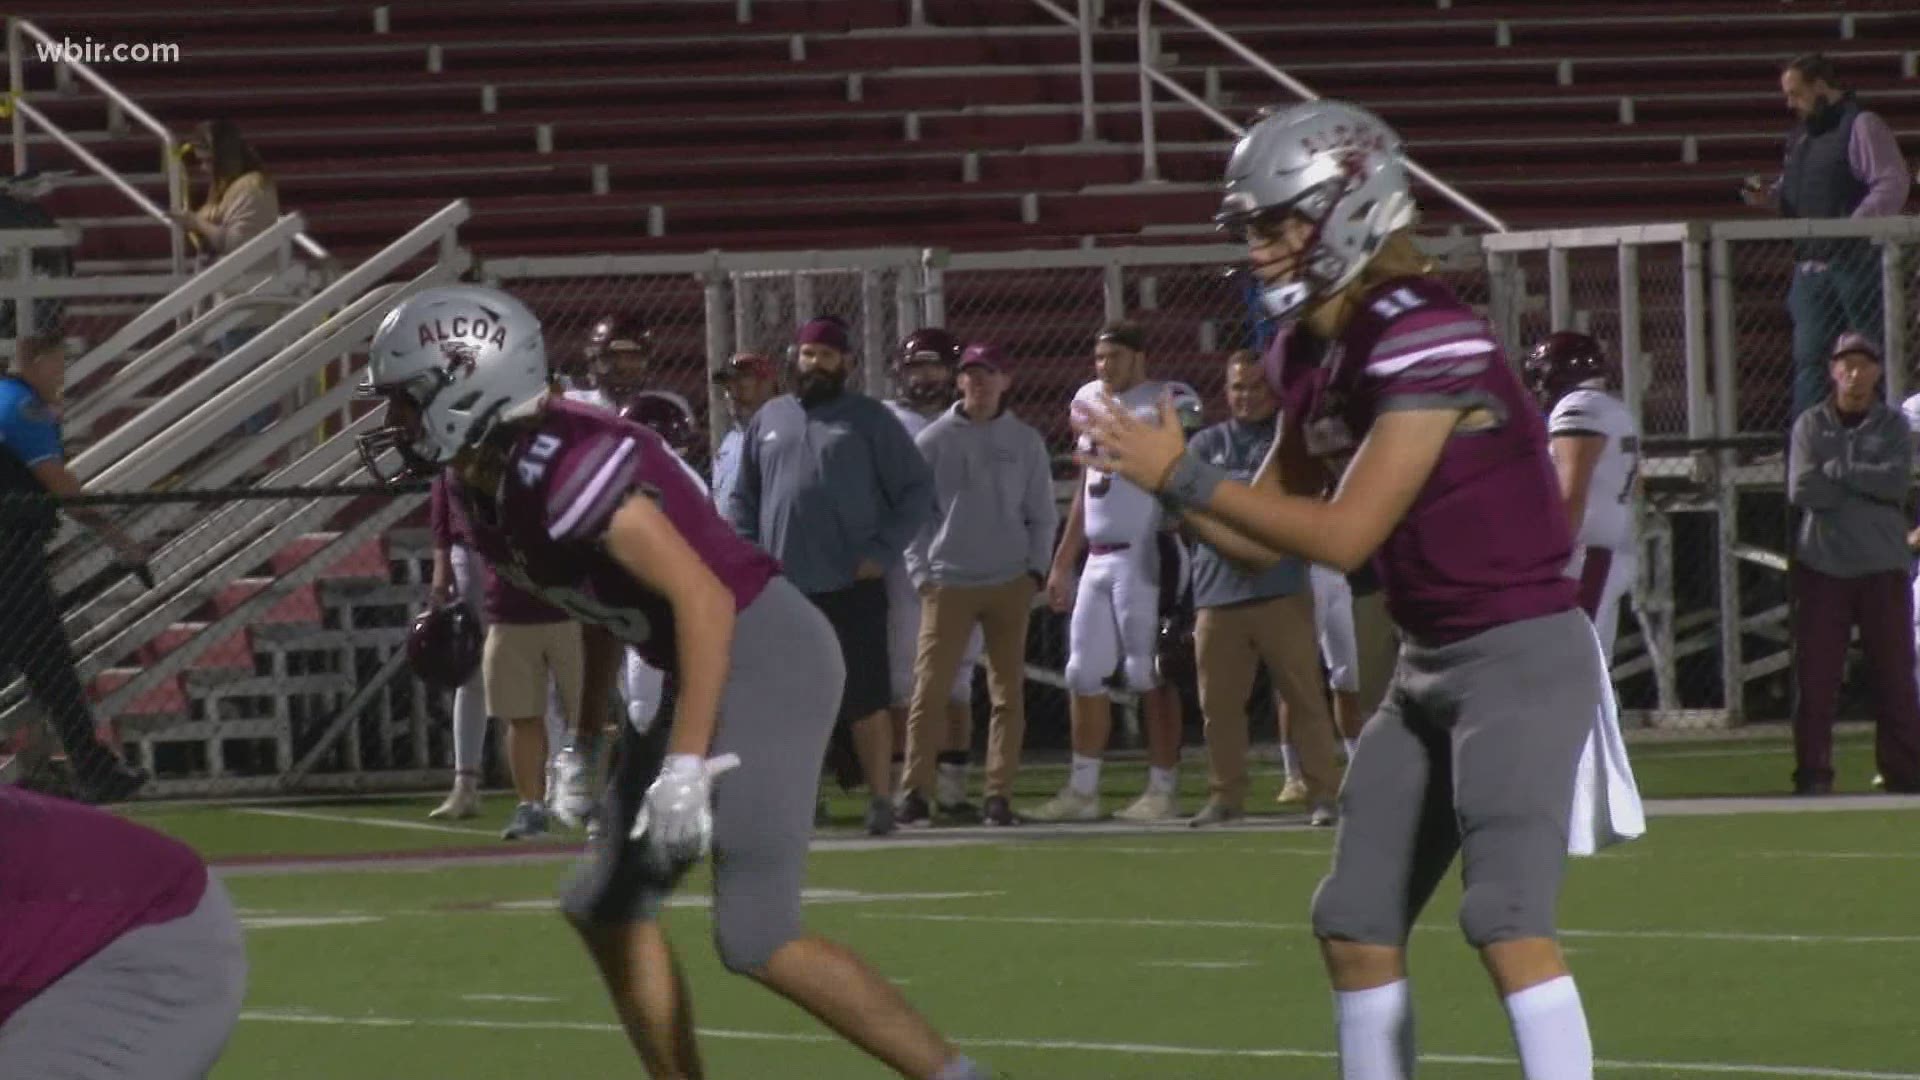 Alcoa beats Johnson County in the first round of the playoffs.